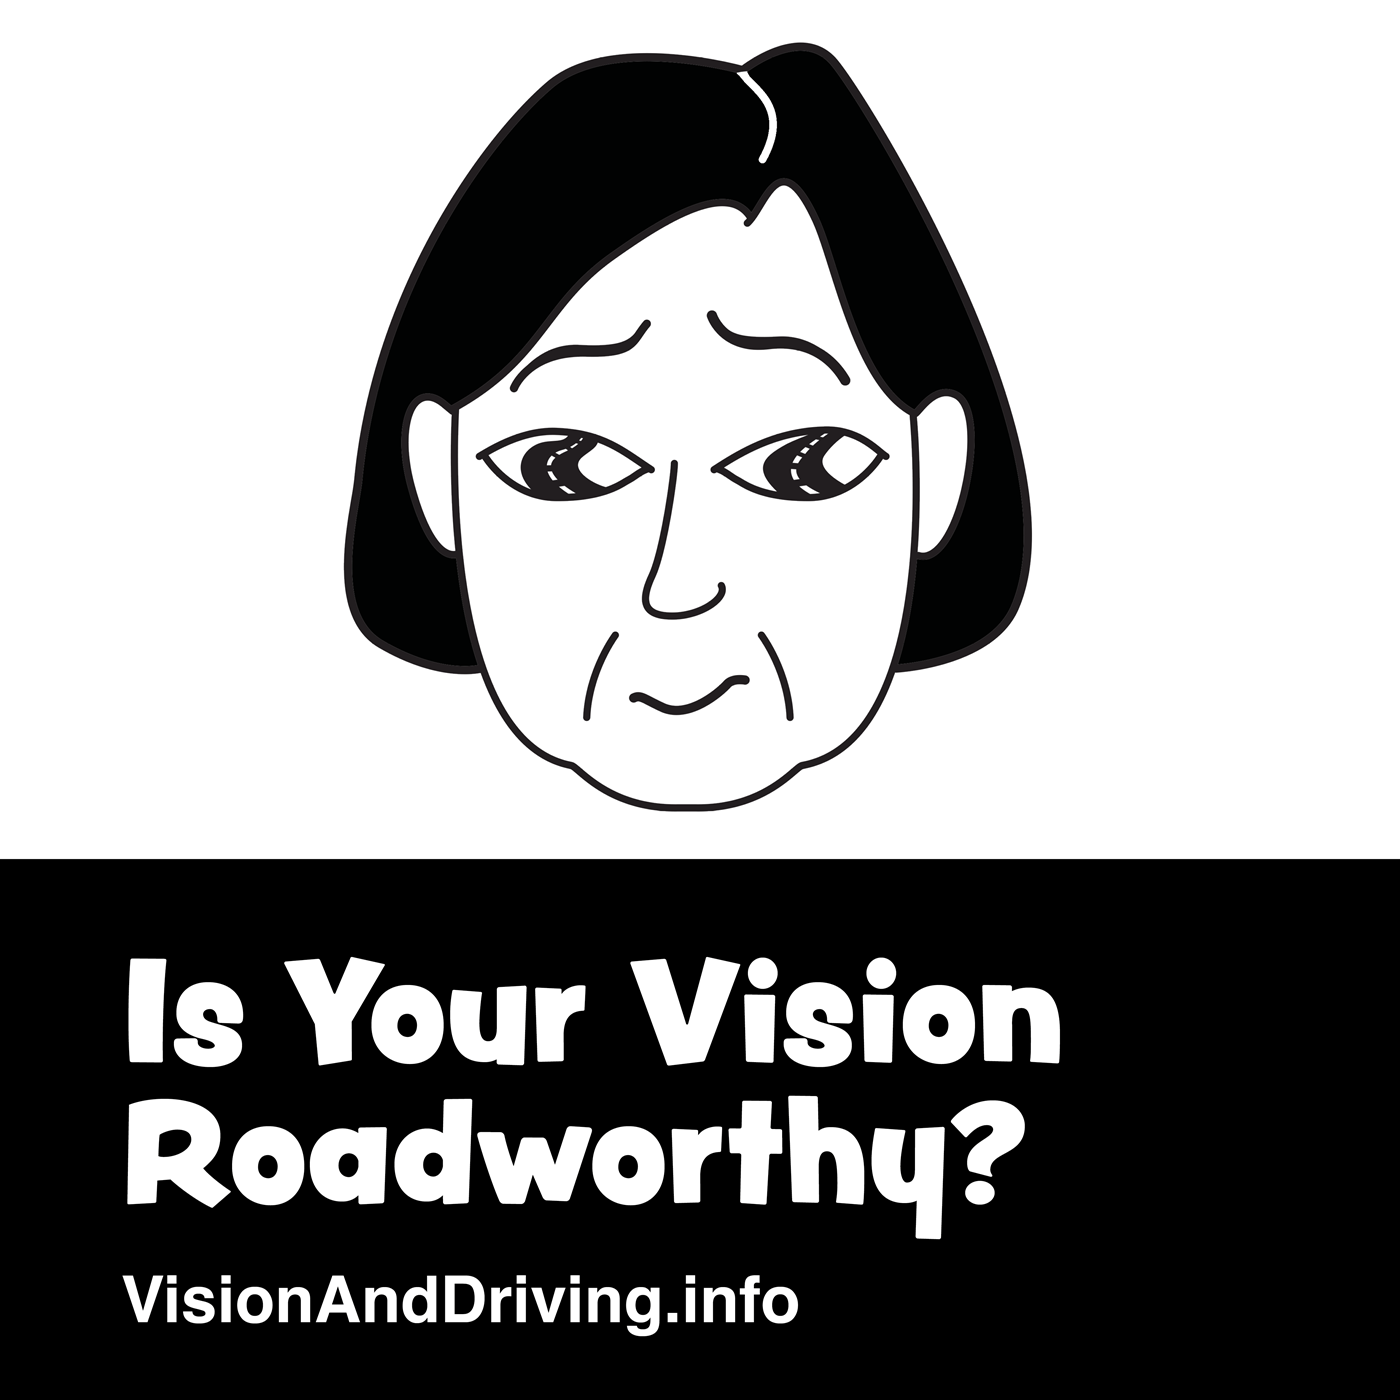 /COO/media/Media/News/2023/April/Is-Your-Vision-Roadworthy-Square-(Instagram)-Graphic-w-web-address.png